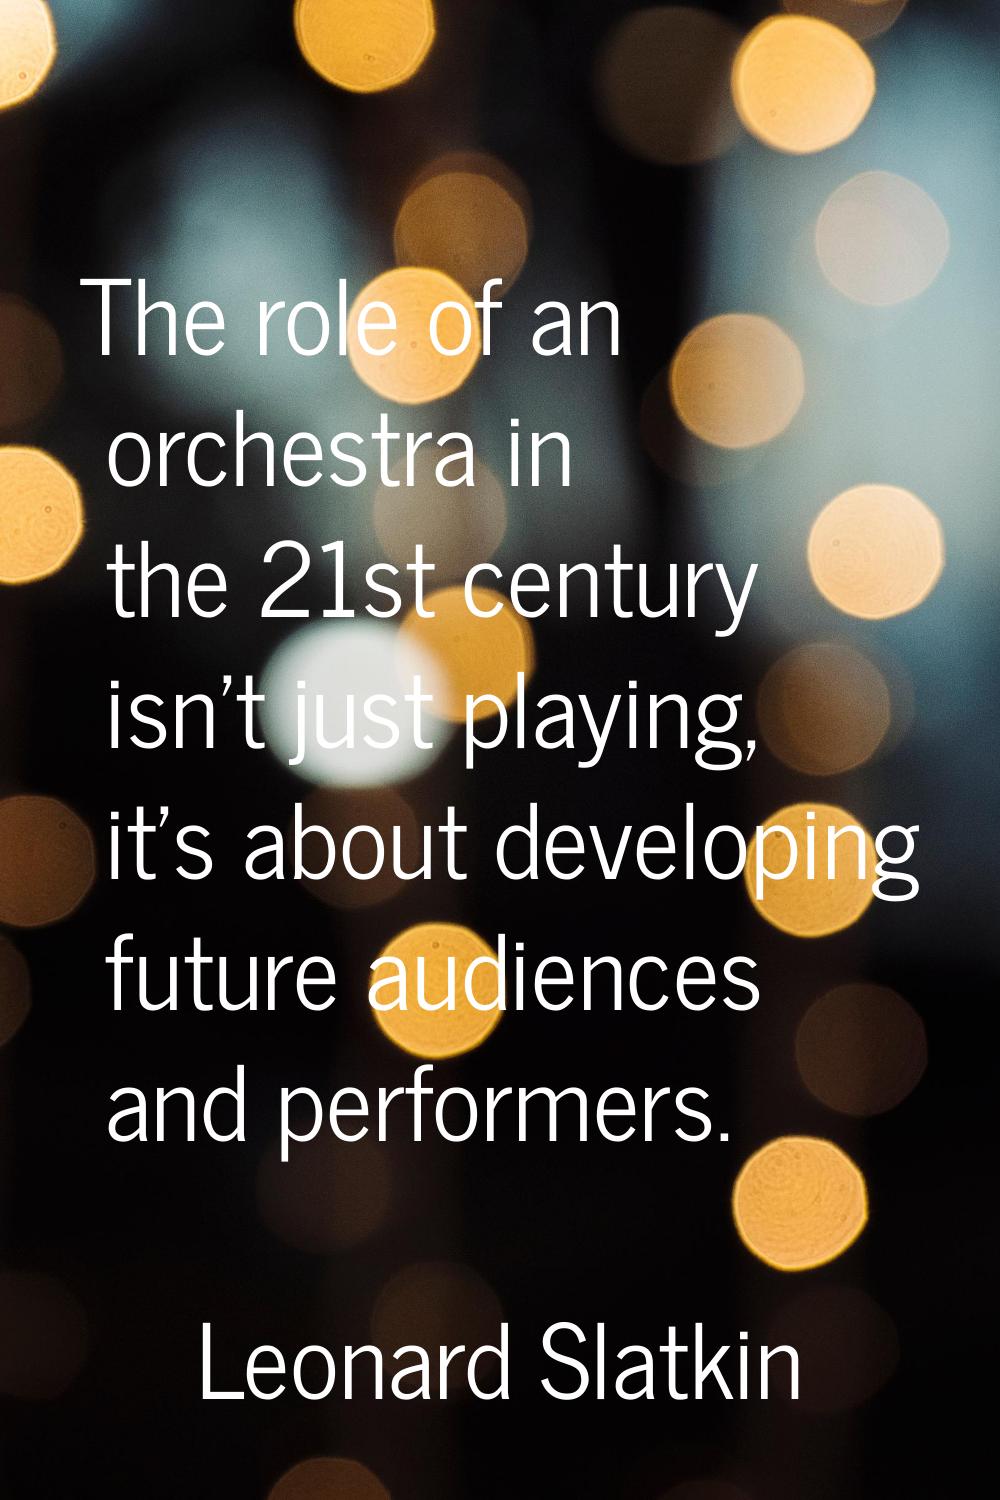 The role of an orchestra in the 21st century isn't just playing, it's about developing future audie